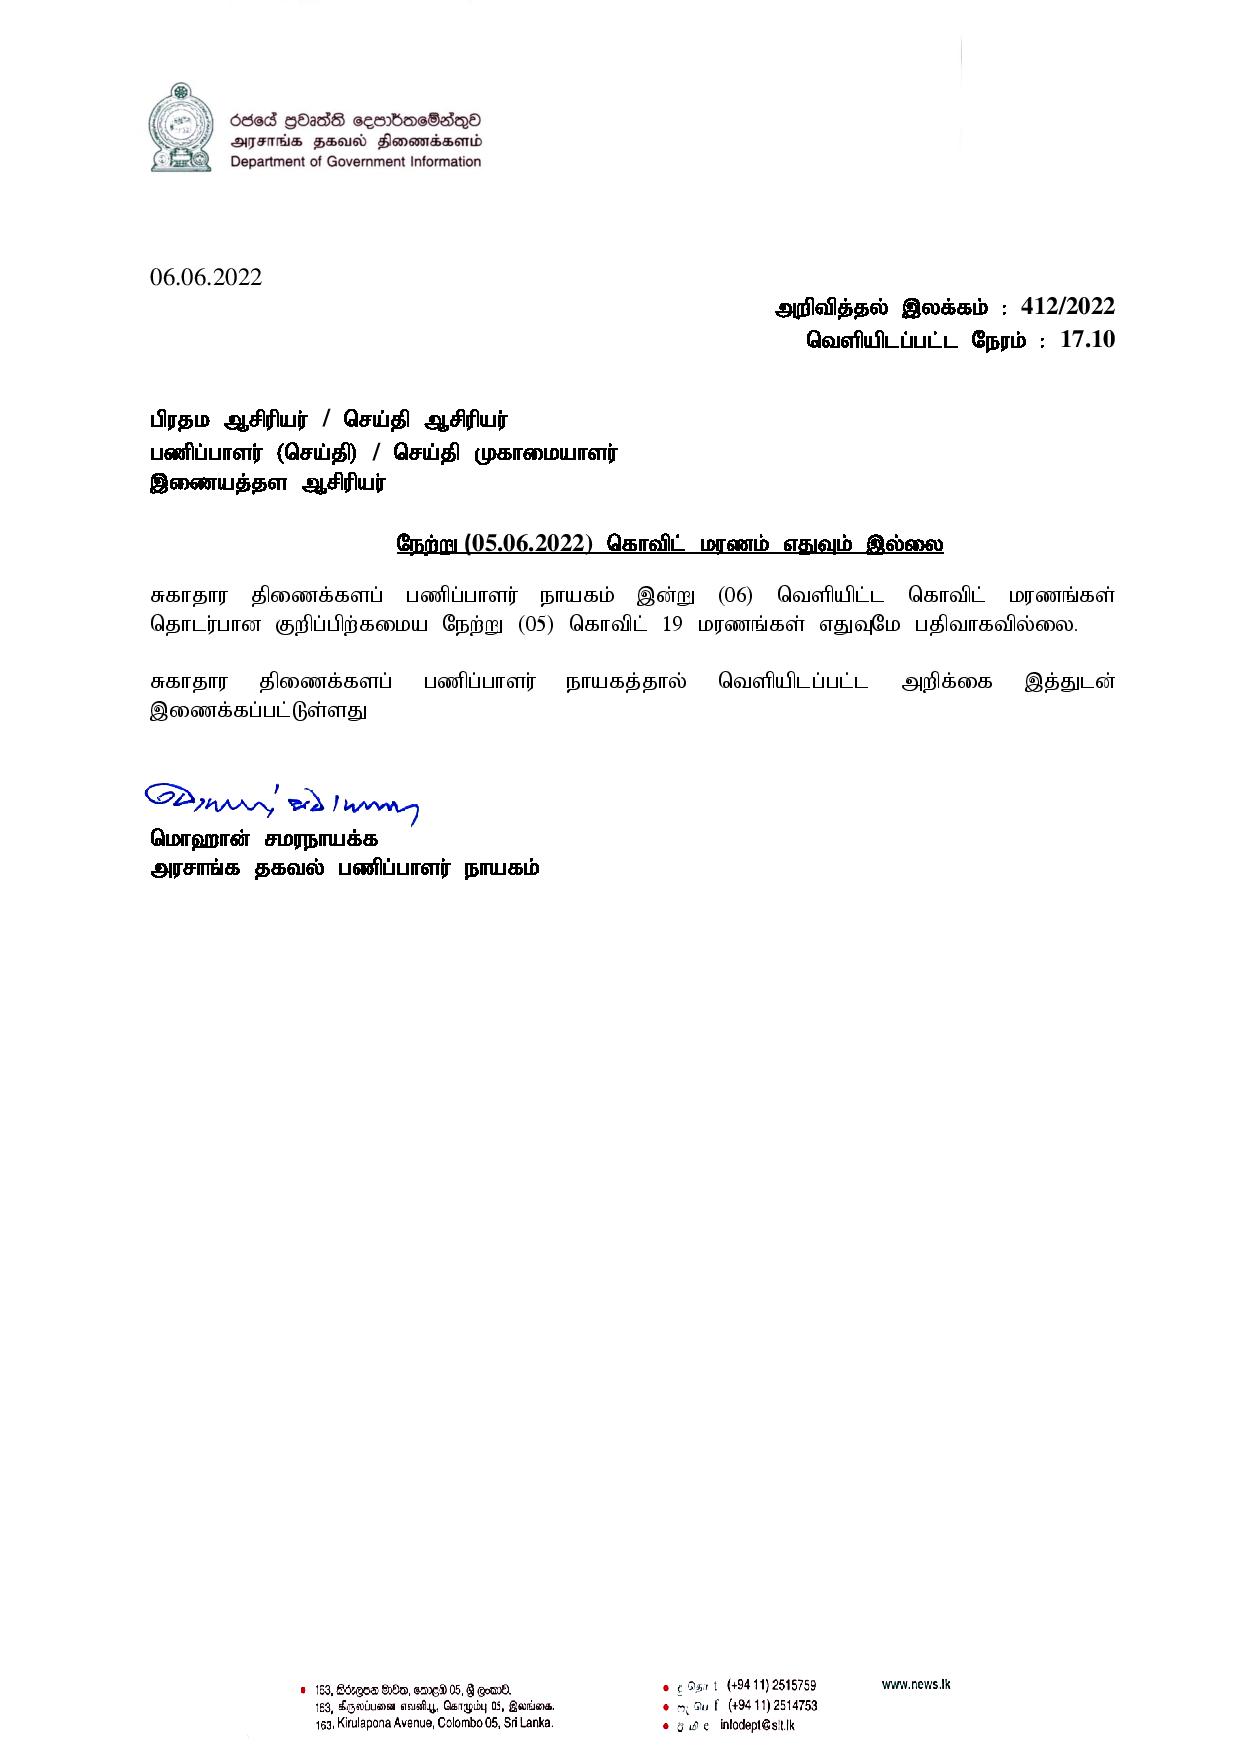 Press Release 412 Tamil page 001